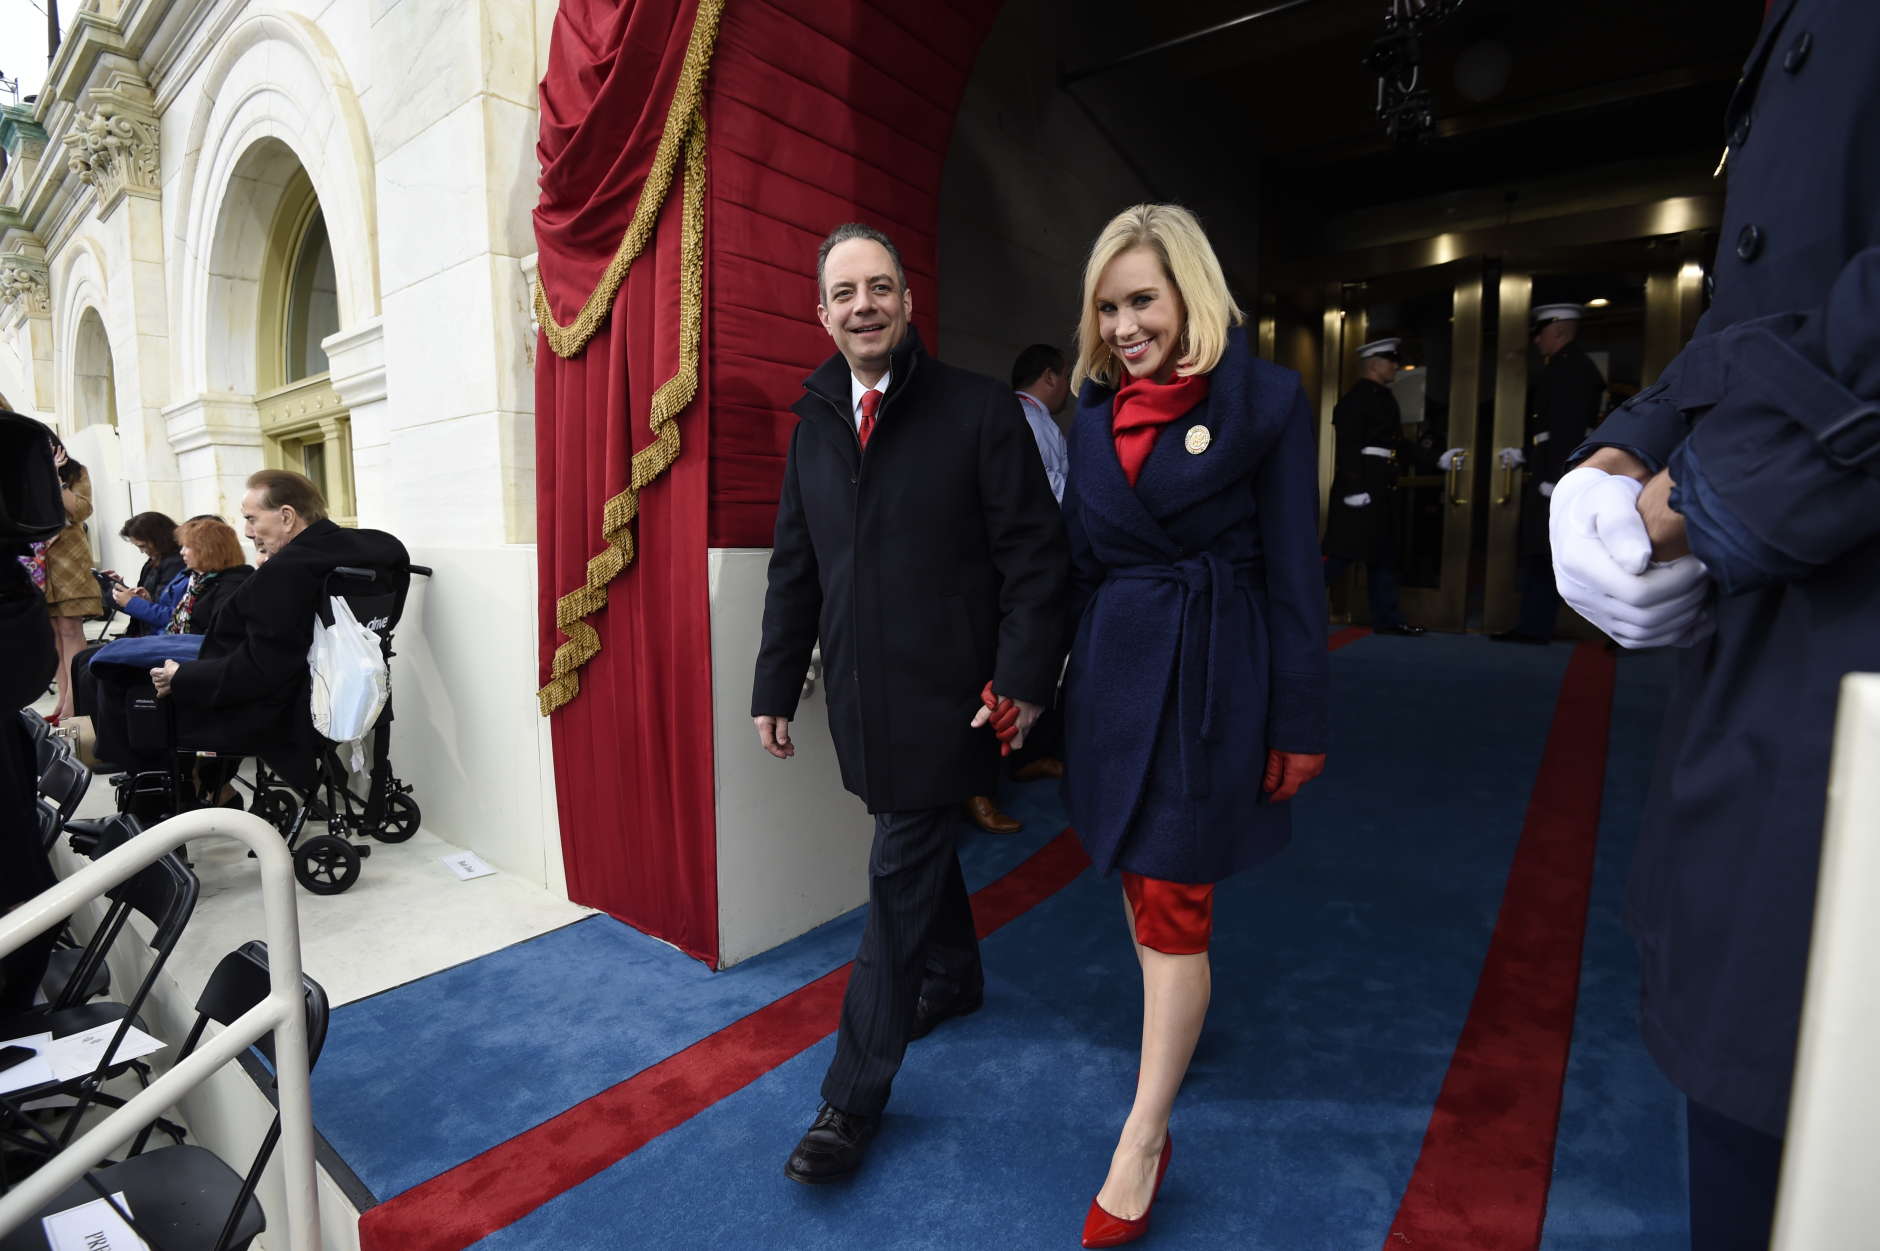 WASHINGTON, DC - JANUARY 20: Reince Priebus, White House Chief of Staff to President-elect Donald Trump, and his wife Sally arrive for the Presidential Inauguration at the US Capitol on January 20, 2017 in Washington, DC. Donald J. Trump will become the 45th president of the United States today.  (Photo by Saul Loeb - Pool/Getty Images)